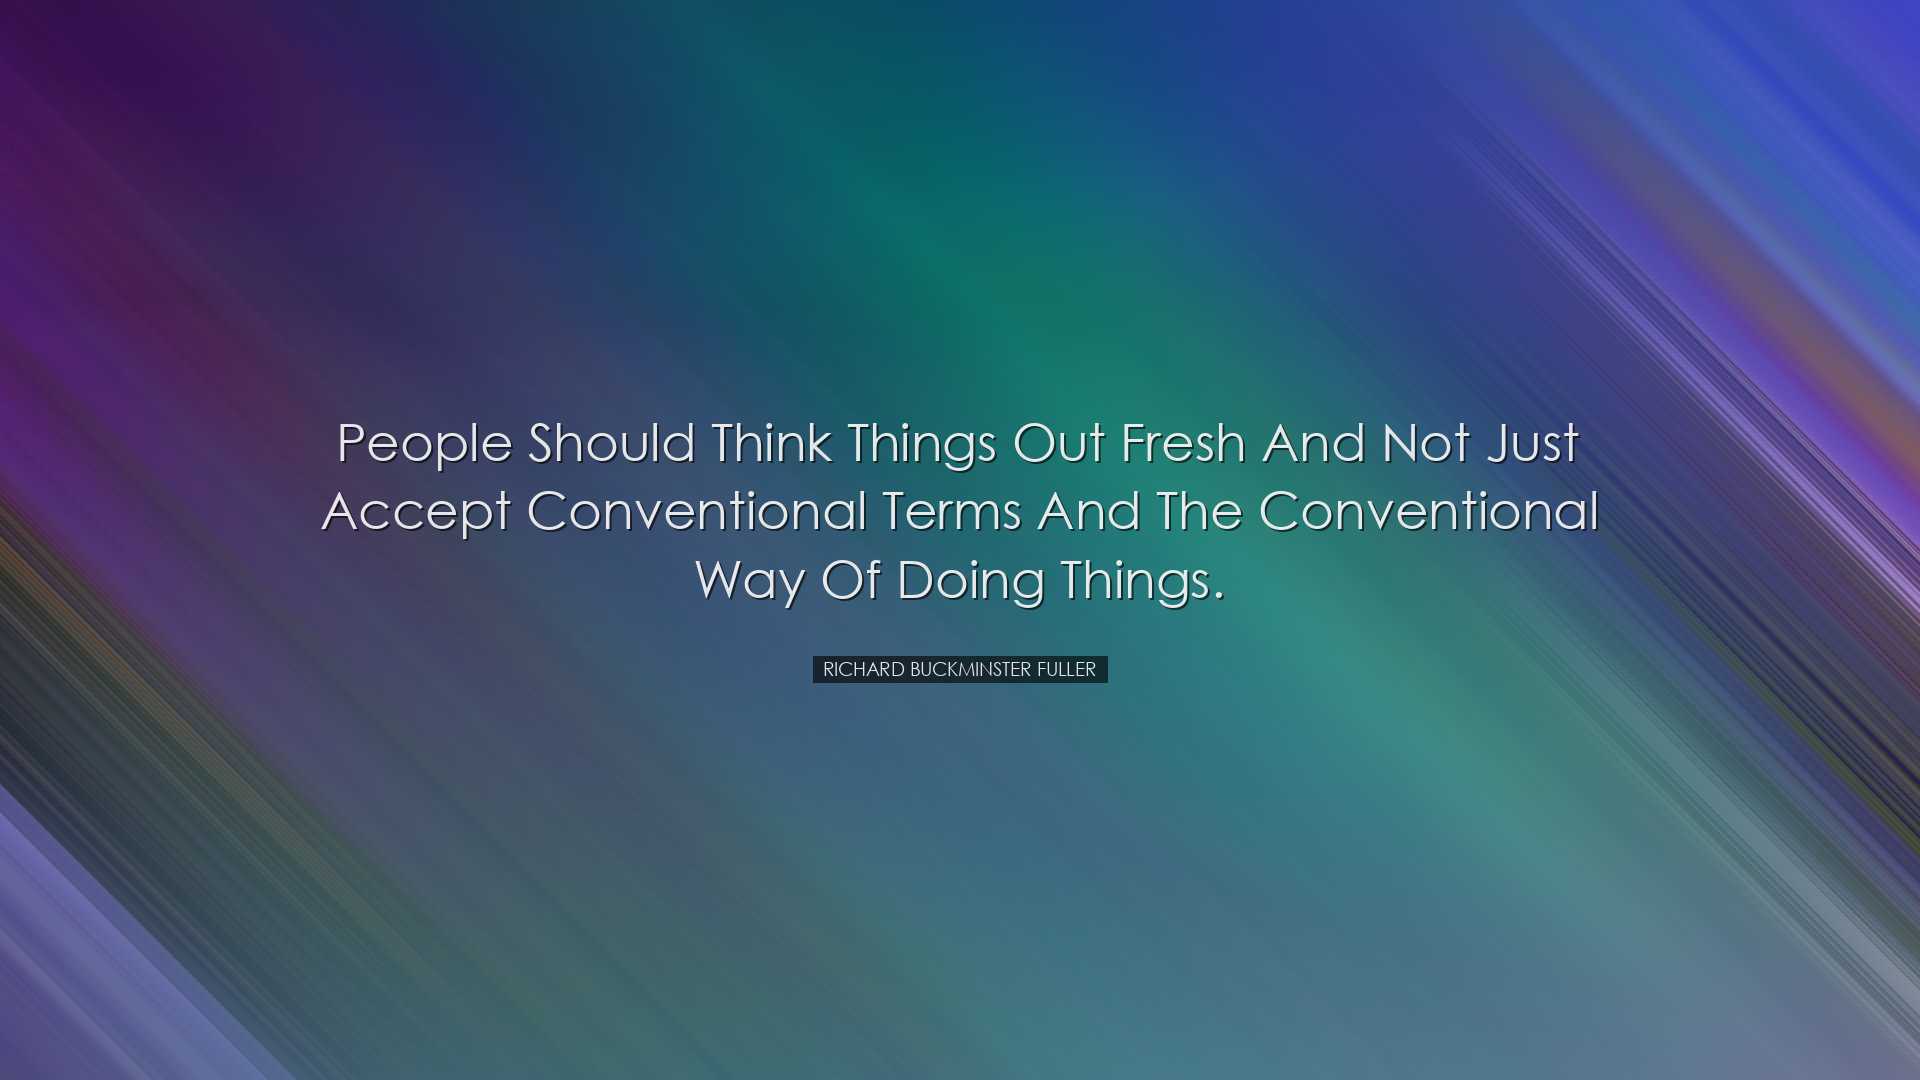 People should think things out fresh and not just accept conventio